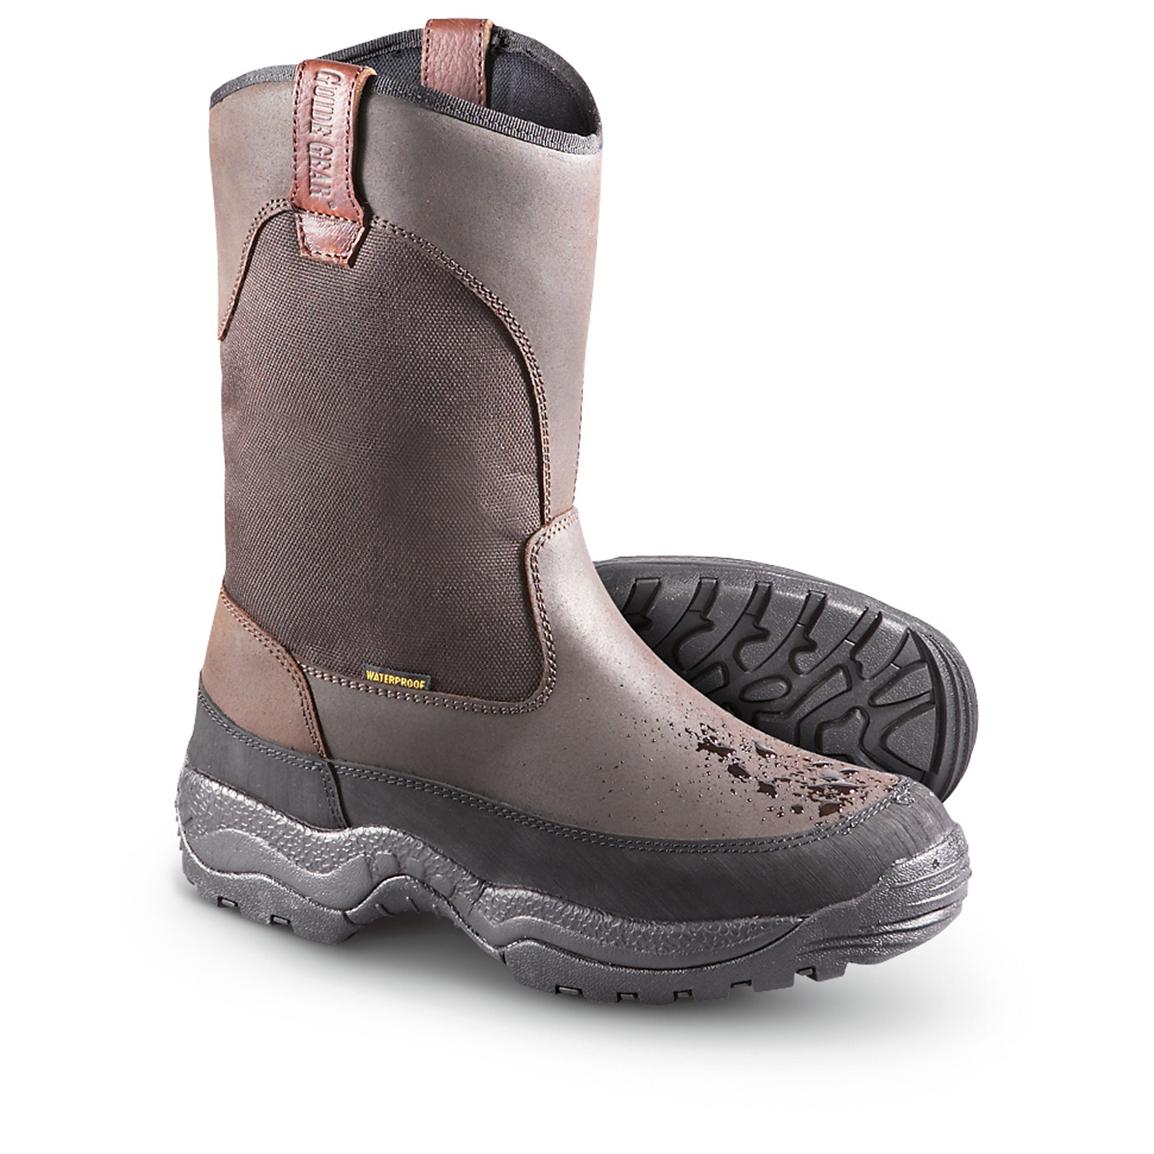 Guide Gear Men's Hunting Pull-On Boots, Insulated, Waterproof - 180121 ...